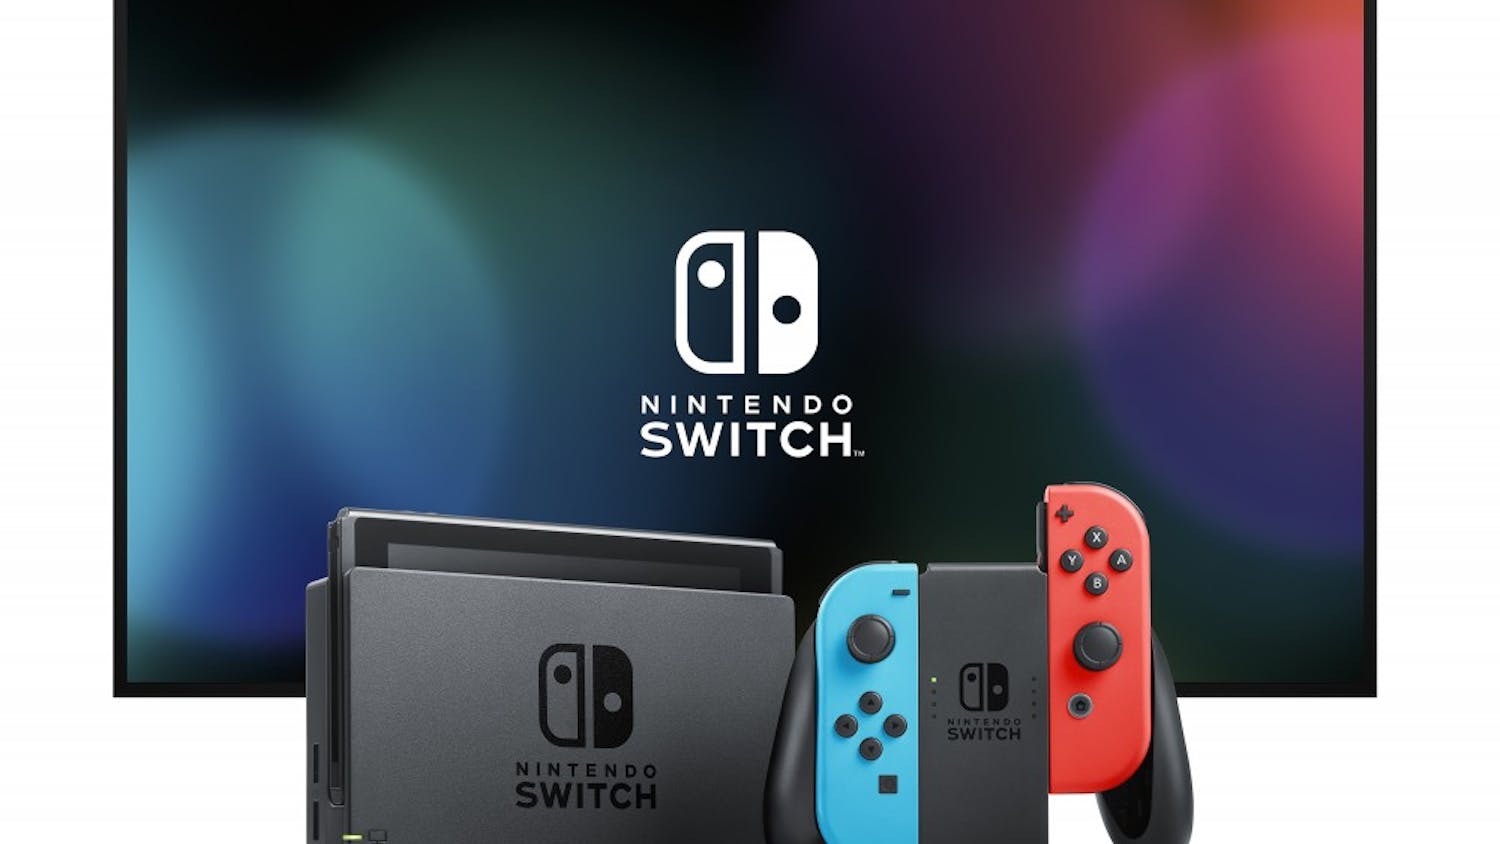 The Nintendo Switch is meant for both home and portable play, with a main unit that includes a screen with capacitive touch. (Nintendo of America)